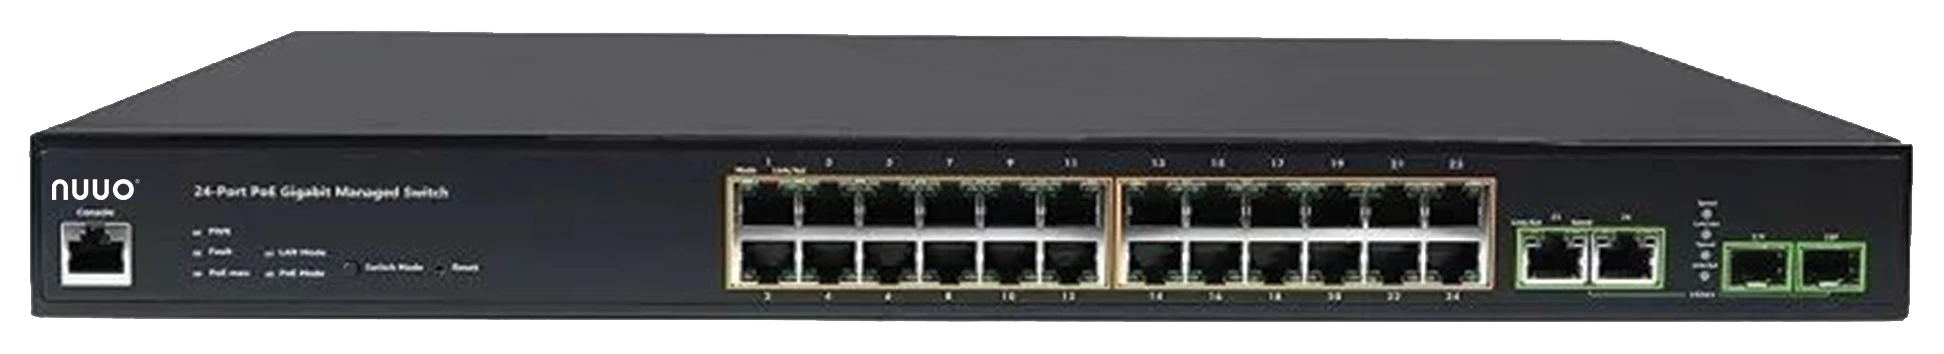 2012-n24poe-switch-product-image-front-17013750231846.png